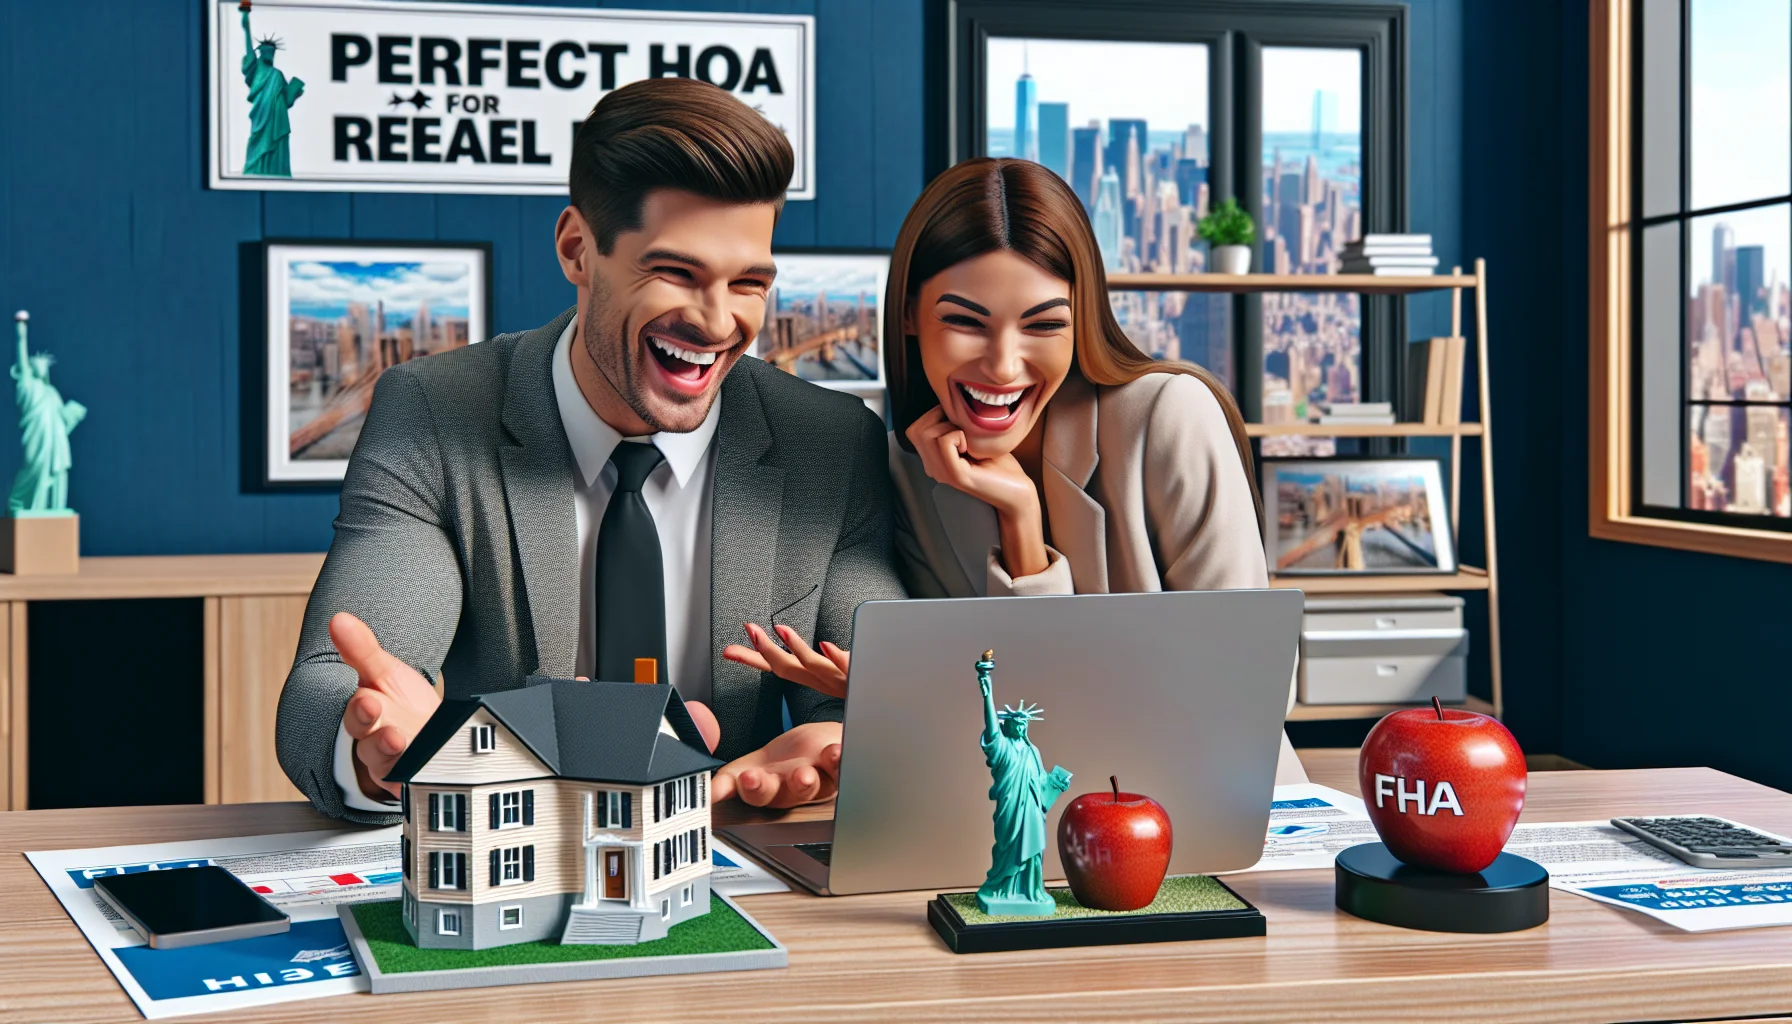 Create a delightful and realistic 3D image where an Caucasian male real estate agent and a Hispanic female client joyously analyze the FHA loan requirements on a laptop. They're sitting in an office filled with NY-themed decor, with landmarks such as the Statue of Liberty, and an apple to symbolize 'The Big Apple'. On the wall, hangs a banner with the slogan 'Perfect Scenario for Real Estate' and on the desk lies a miniature model of a house reflecting the ideal property which they are planning to purchase under the FHA loan scheme.